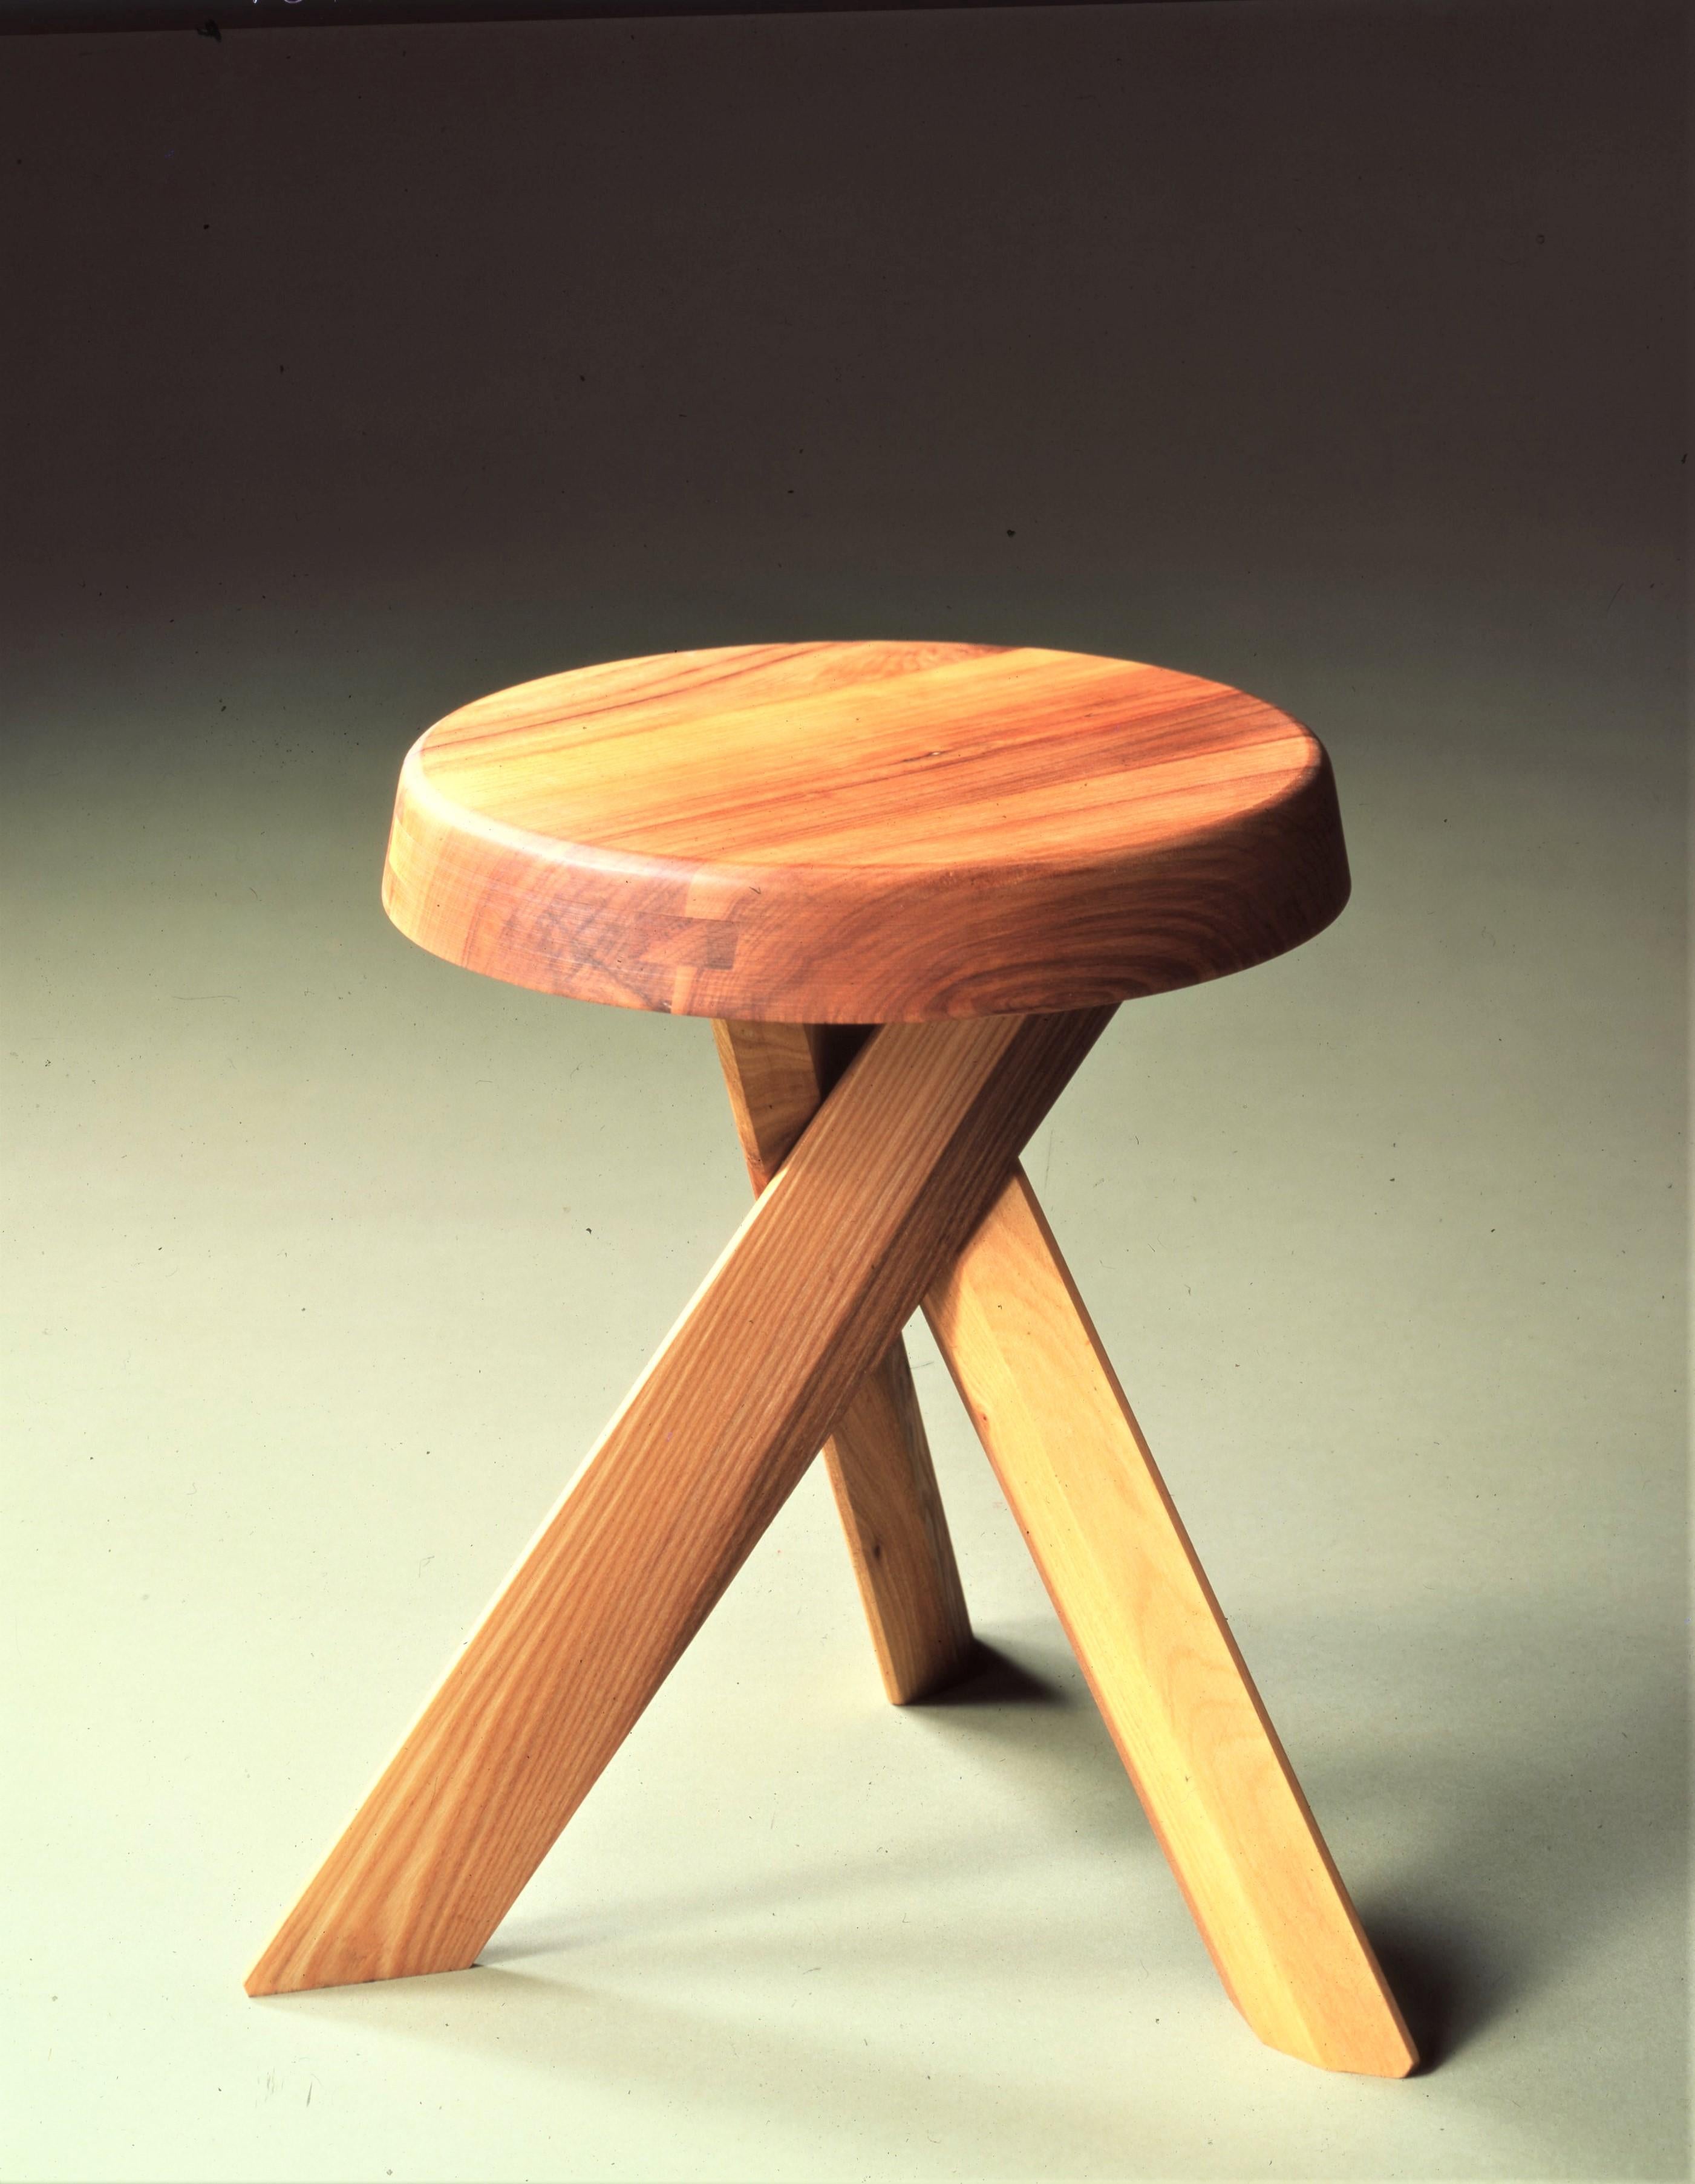 S31A tabouret rond bas stool by Pierre Chapo, France
This remarkable stool was designed in 1974. This stool can be done in a height of 45,55 and 73 cm height.
It shows some very nice woodworking details that also remembers of the designs of